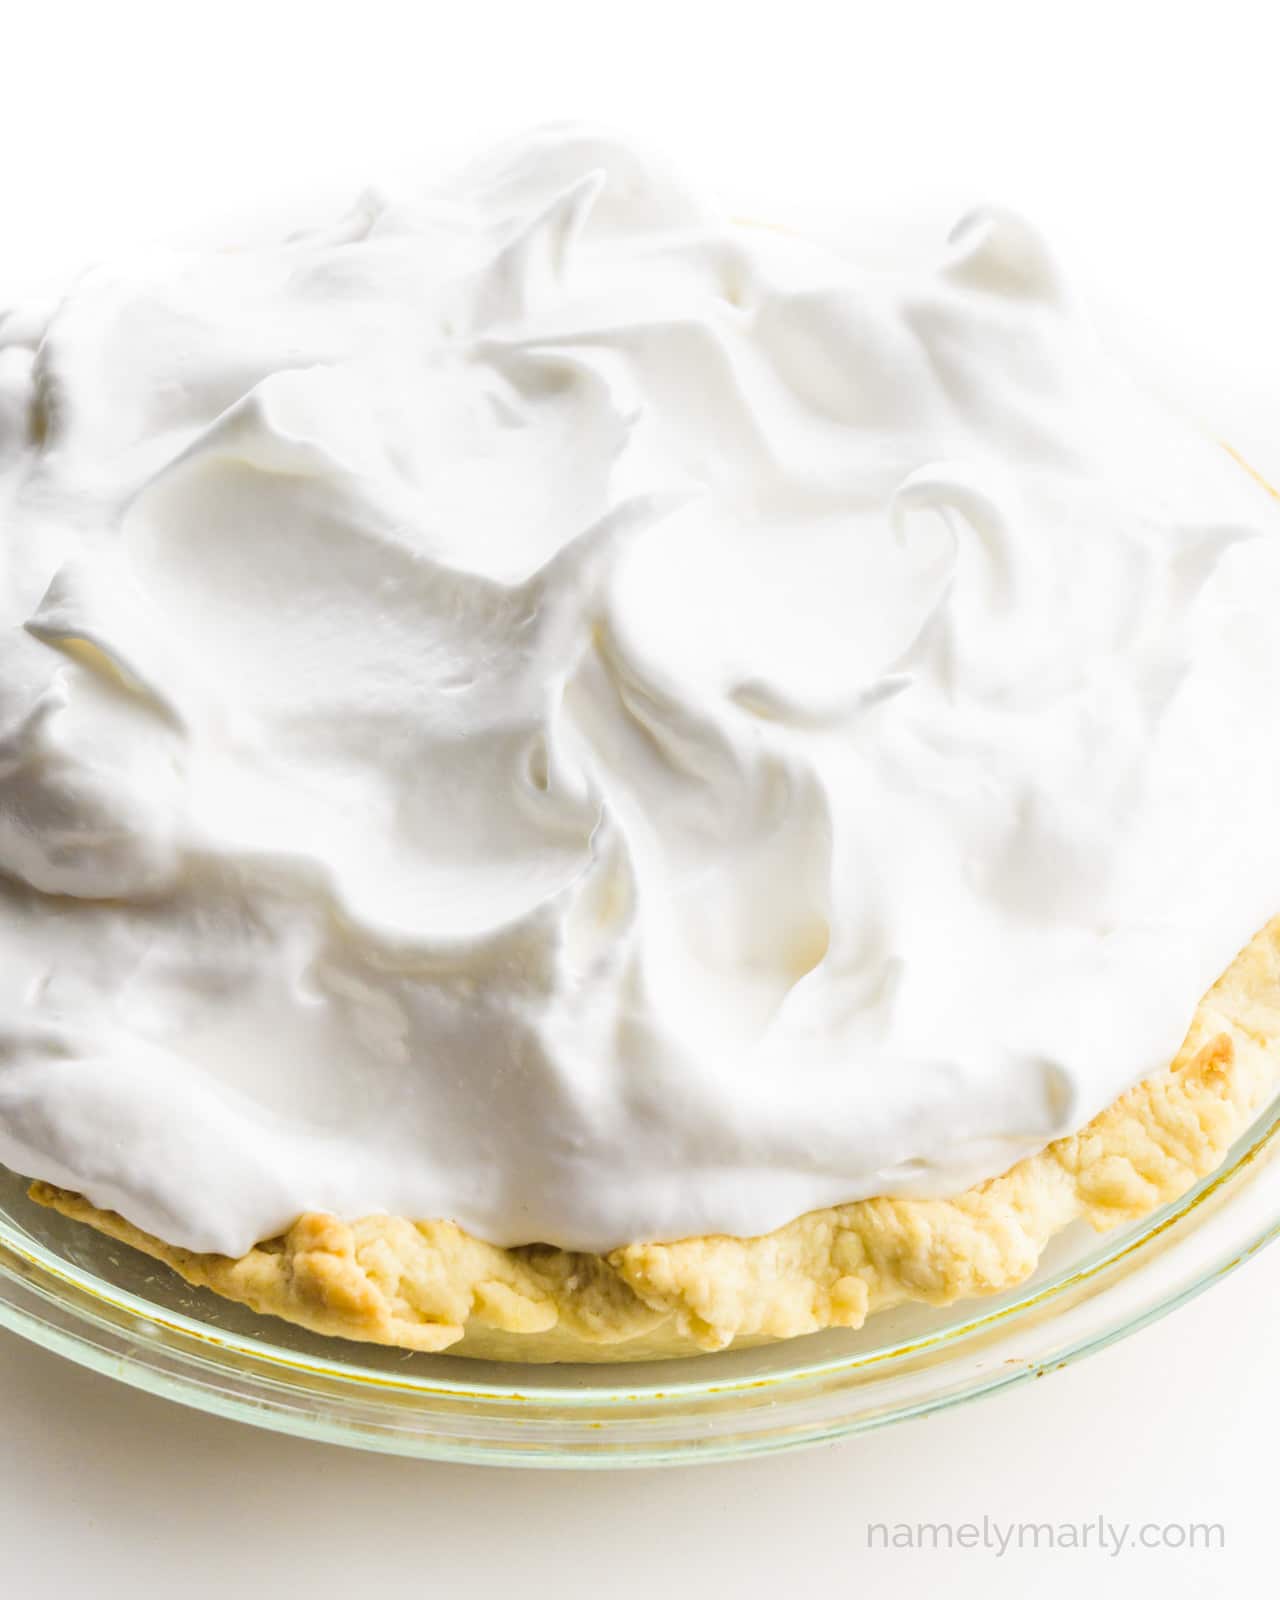 A lemon pie is topped with unbaked meringue.